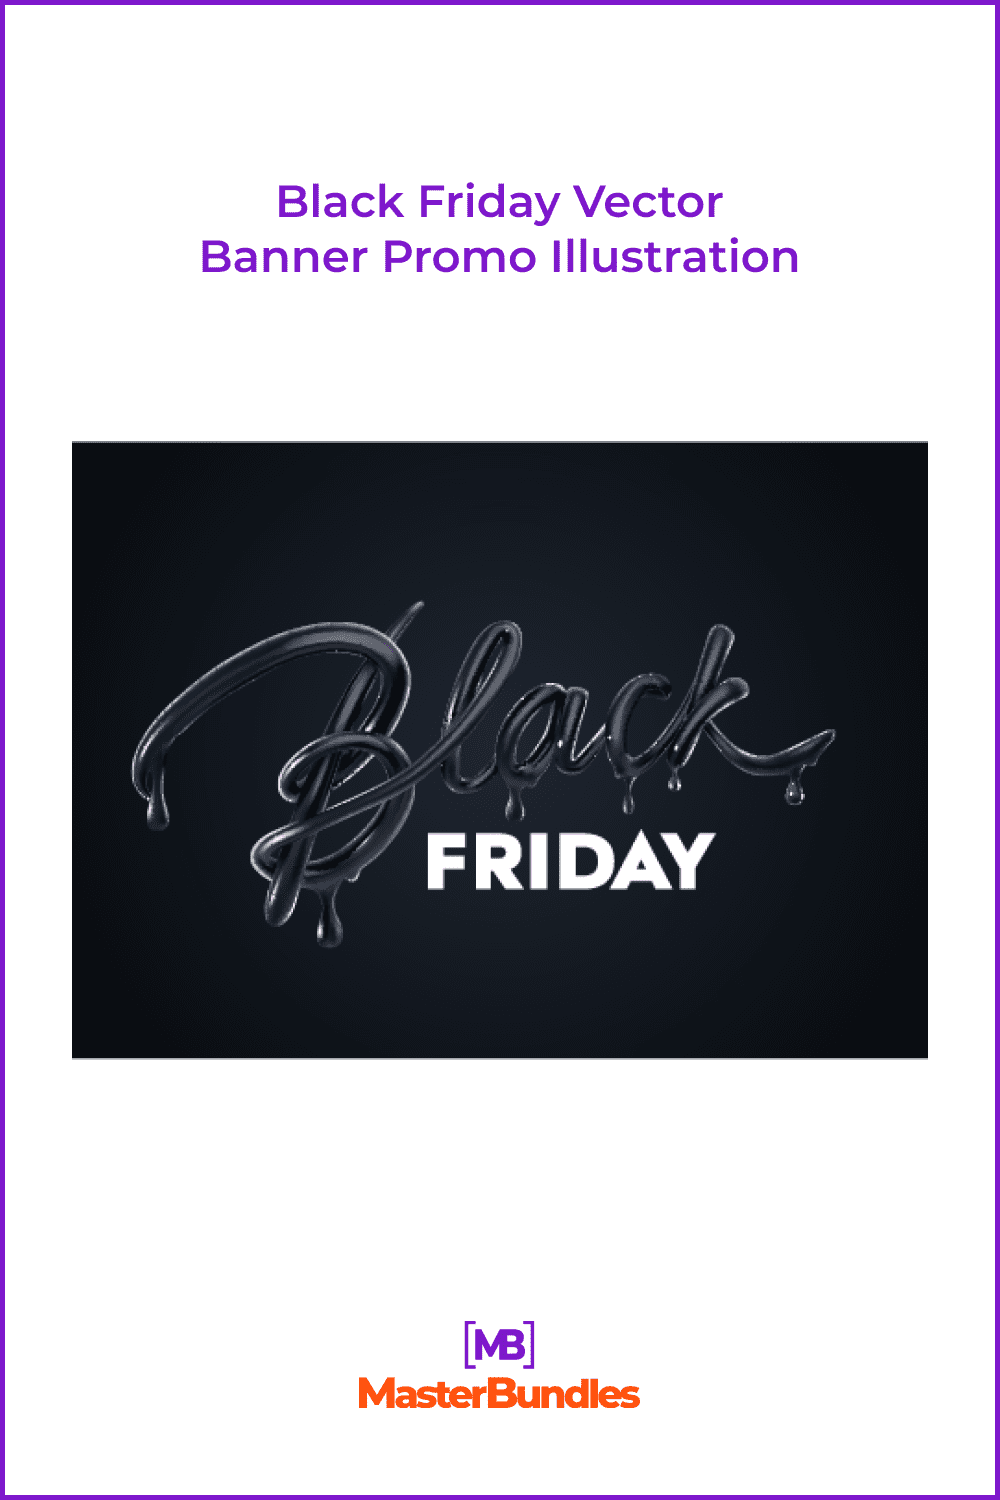 3D Black Friday Vector Promo Banner with Black and White Letters.